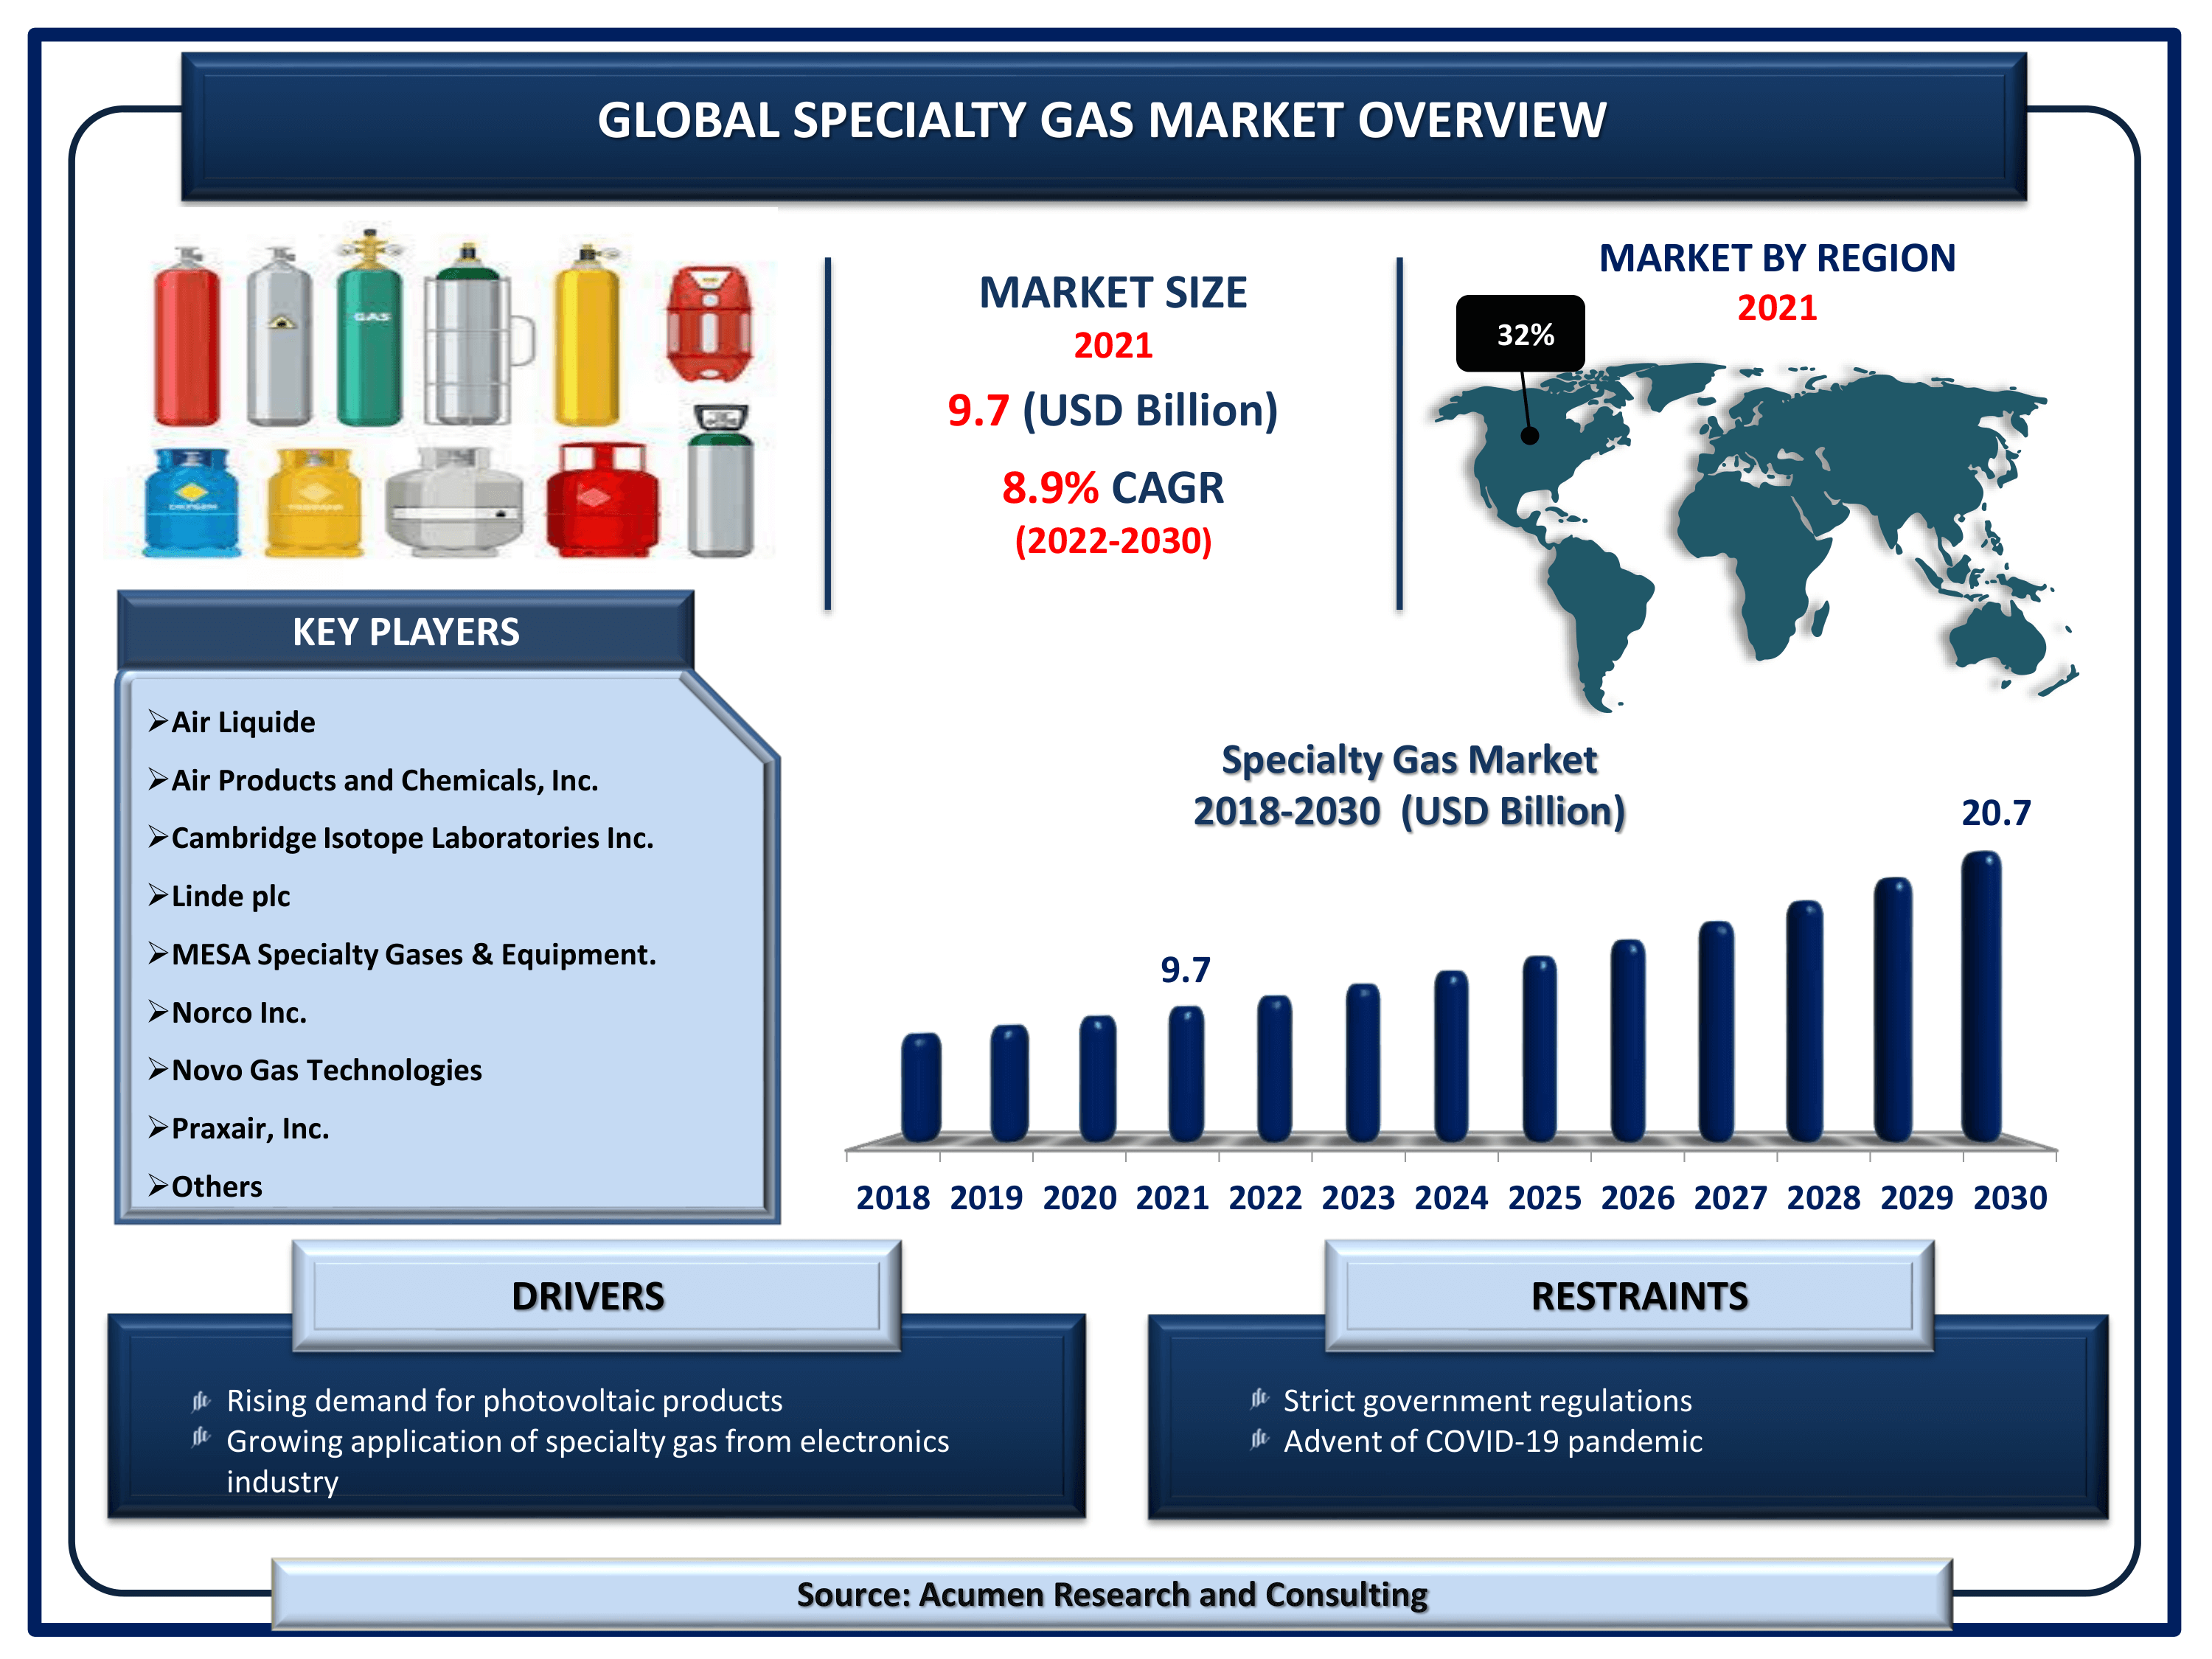 Global specialty gas market revenue is estimated to reach USD 20.7 Billion by 2030 with a CAGR of 8.9% from 2022 to 2030